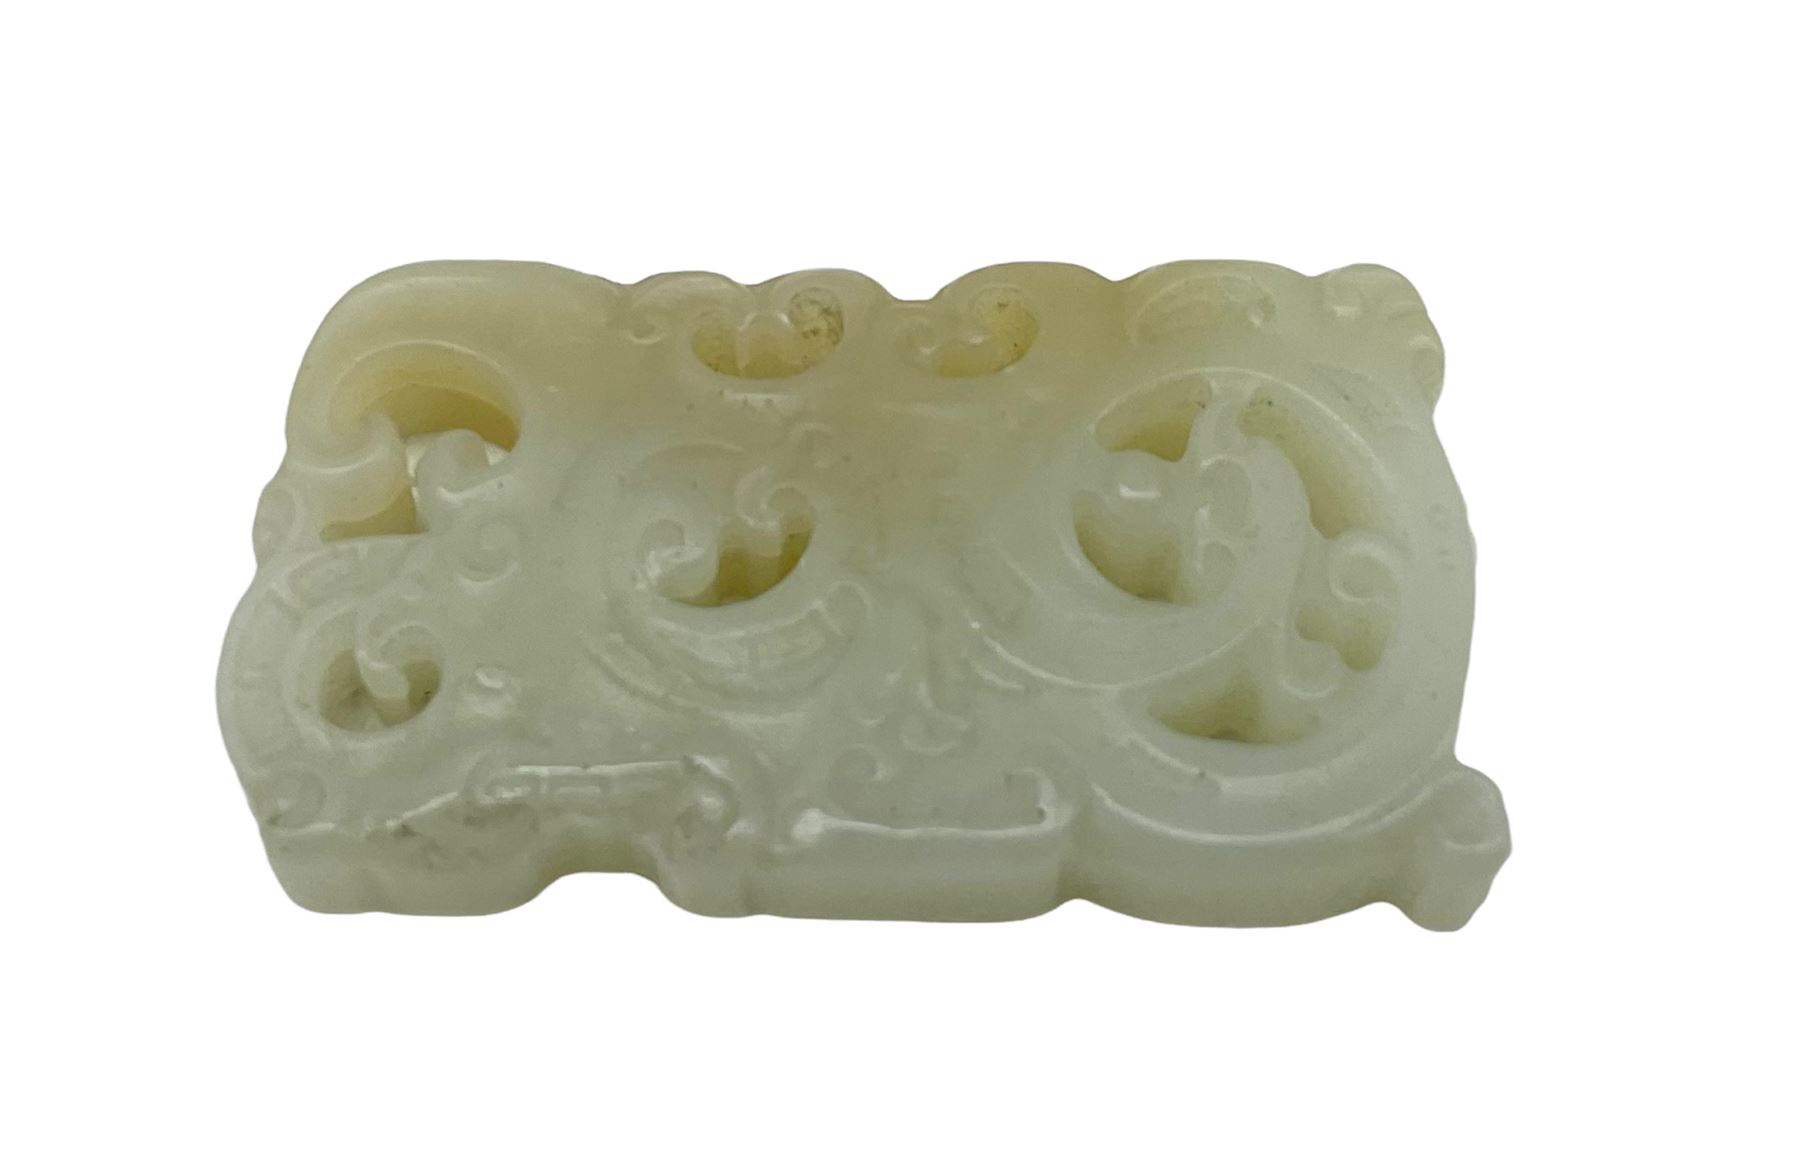 Chinese jade rectangular plaque with carved and pierced decoration 4.5cm x 2.5cm